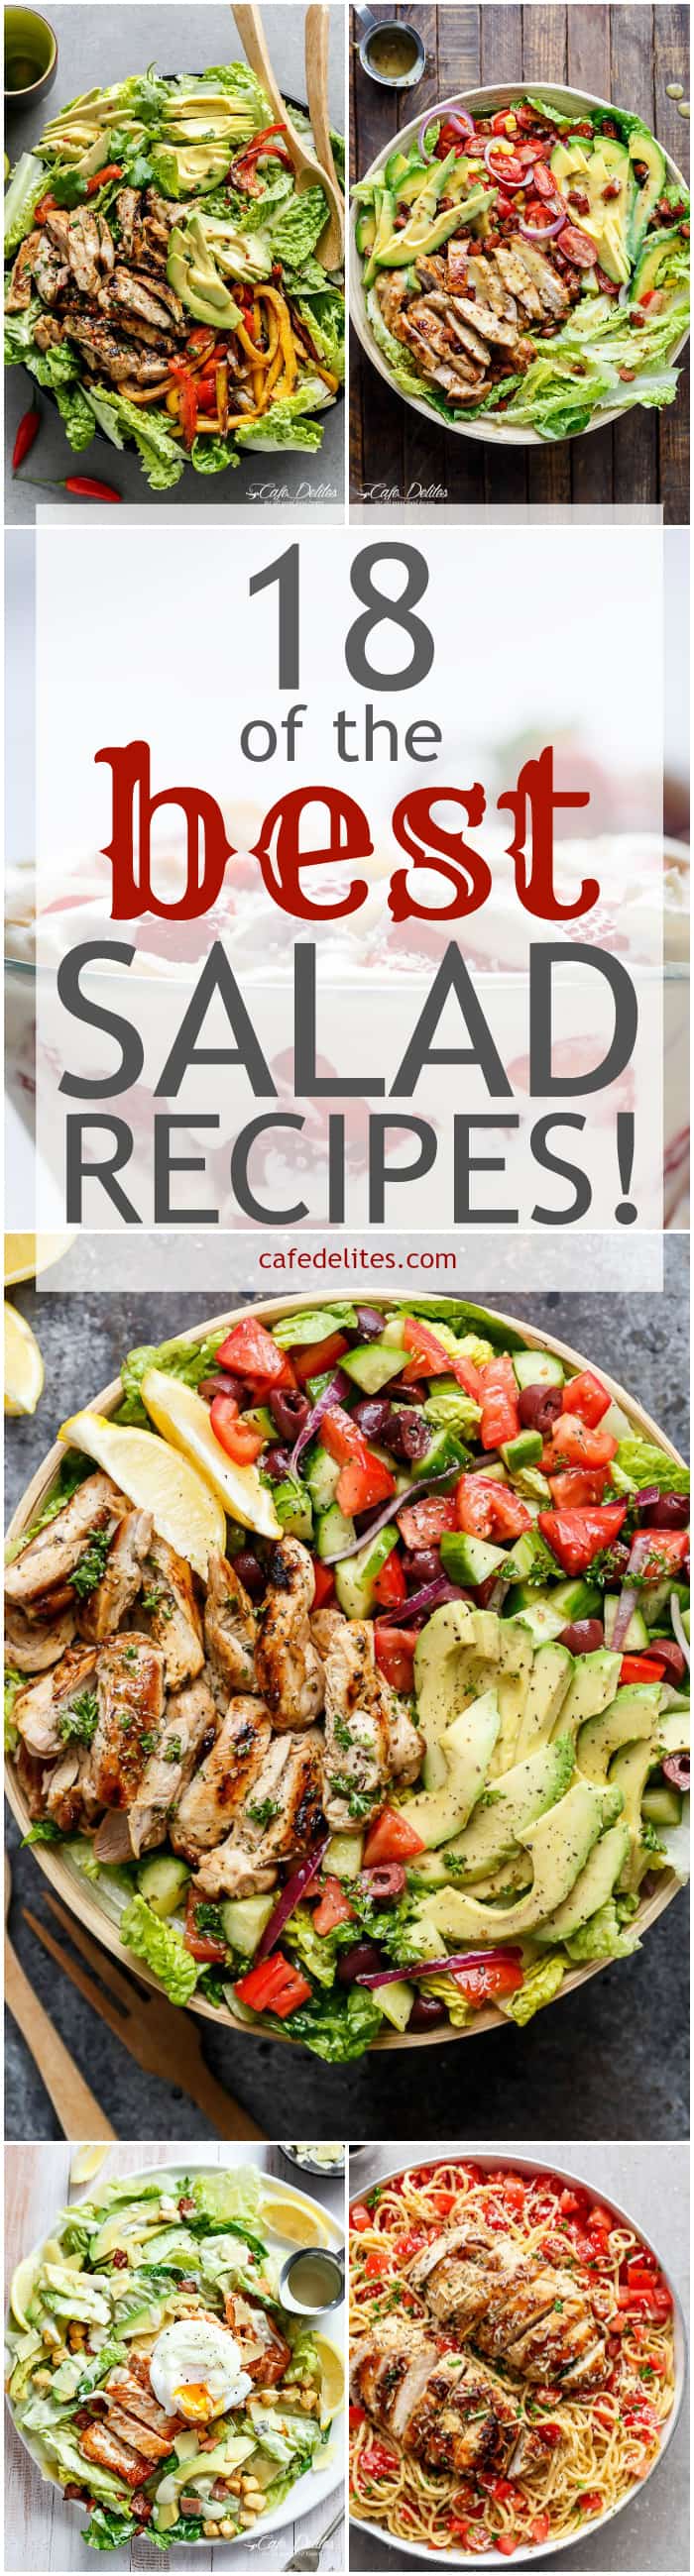 18 Best Salad Recipes – Cafe Delites – TheDirtyGyro